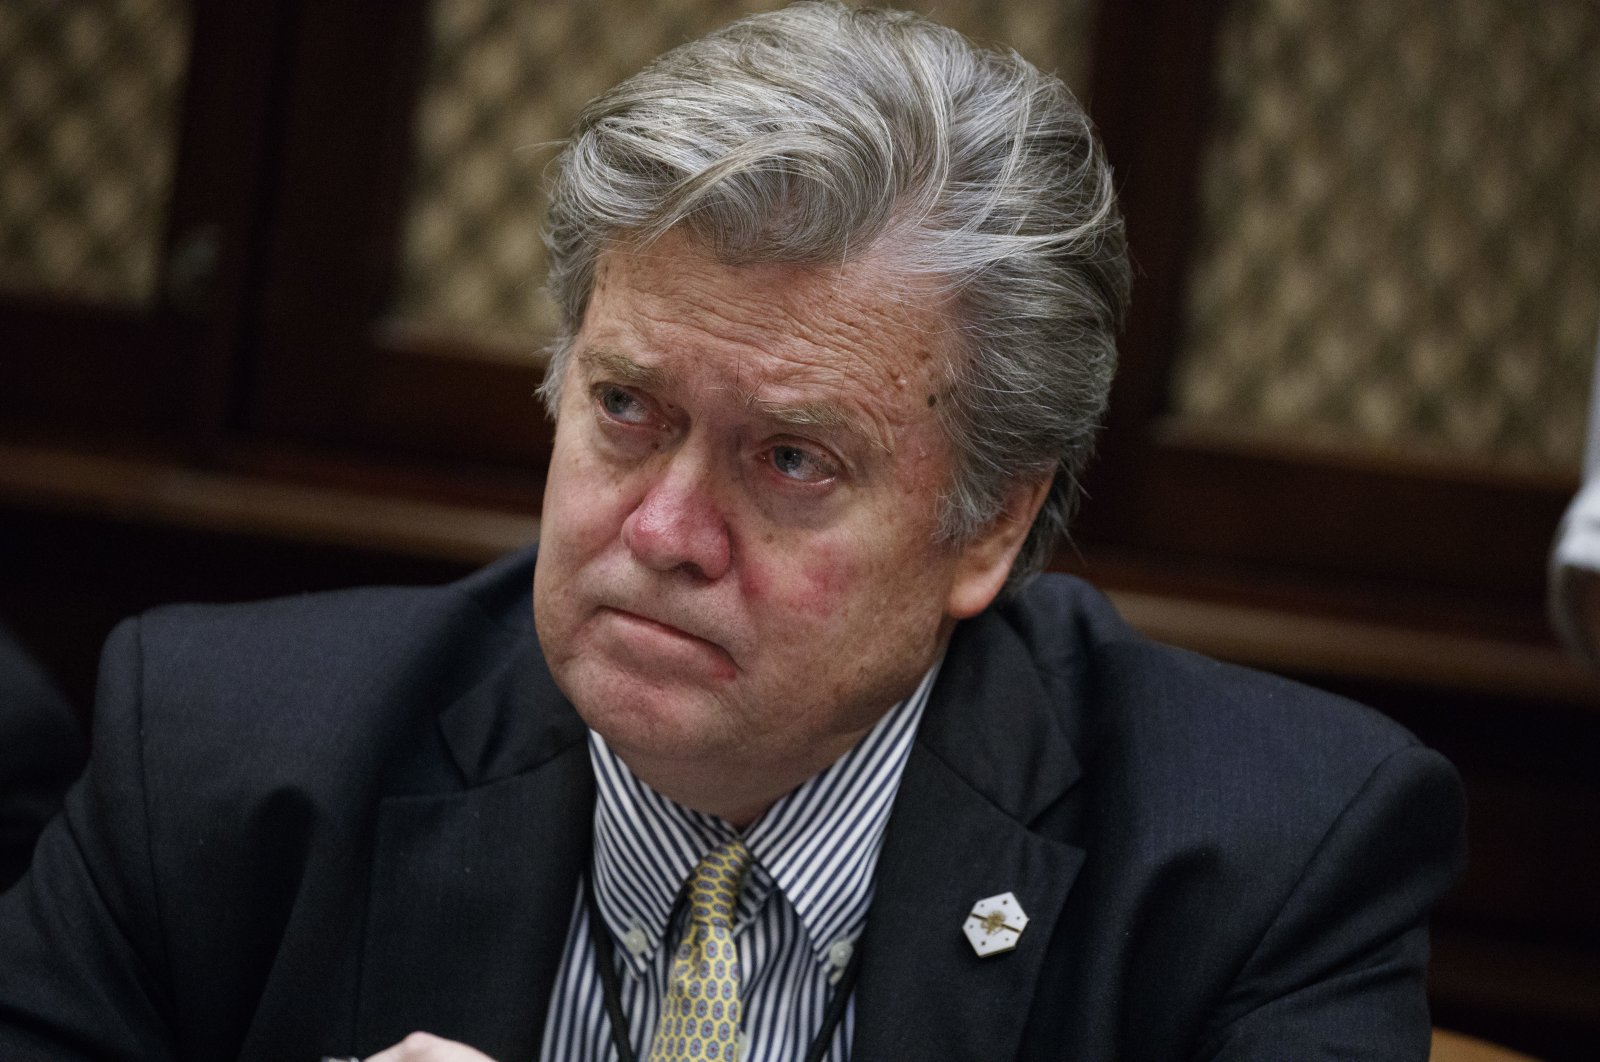 White House chief strategist Steve Bannon is seen in the Roosevelt Room of the White House in Washington, D.C., U.S., Feb. 7, 2017. (AP Photo)